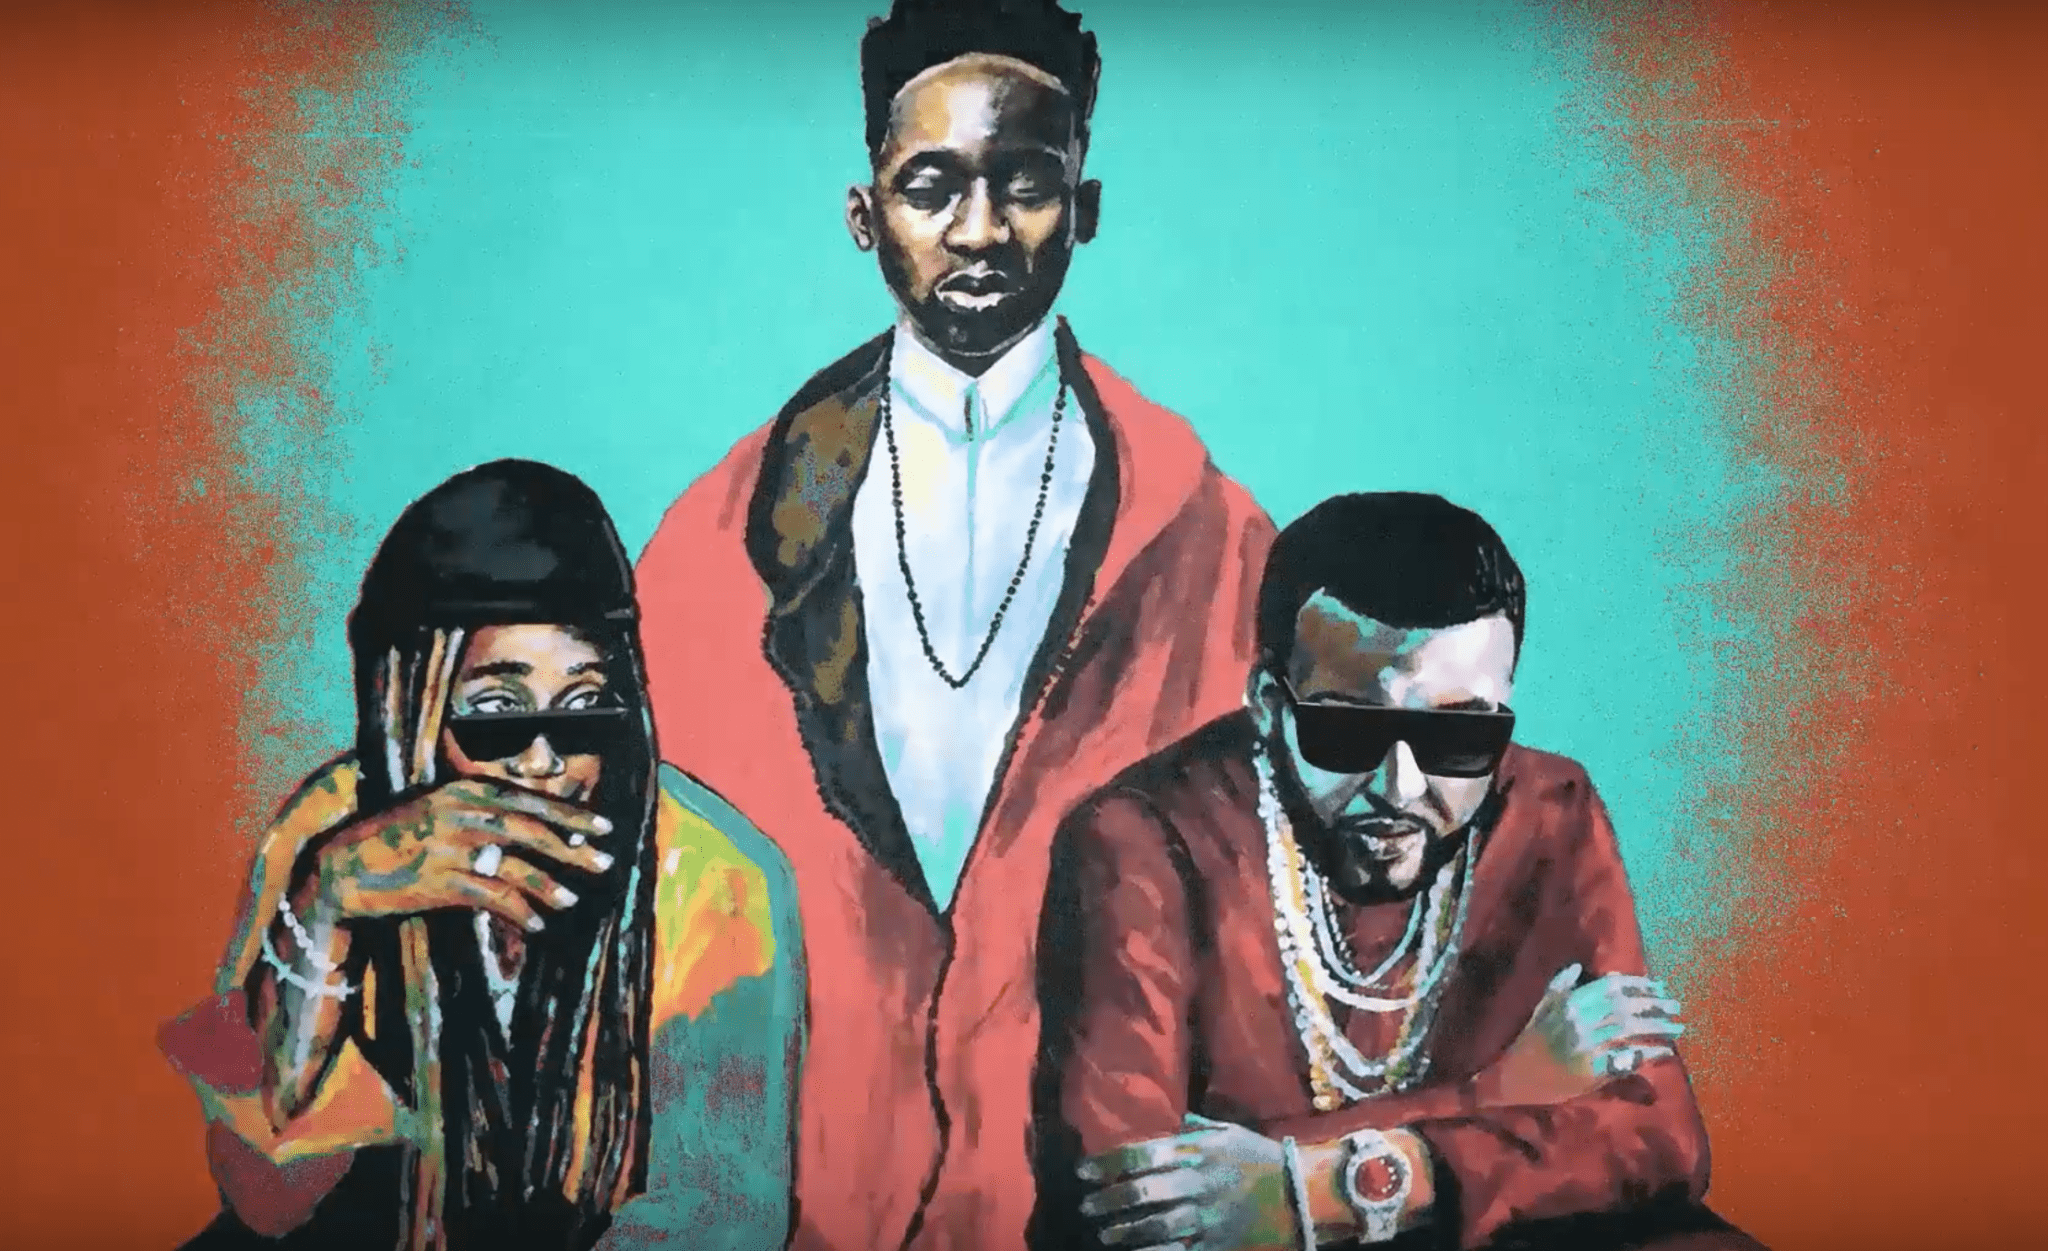 Mr Eazi and Major Lazer Remix “Leg Over” featuring French Montana and Ty Dolla Sign